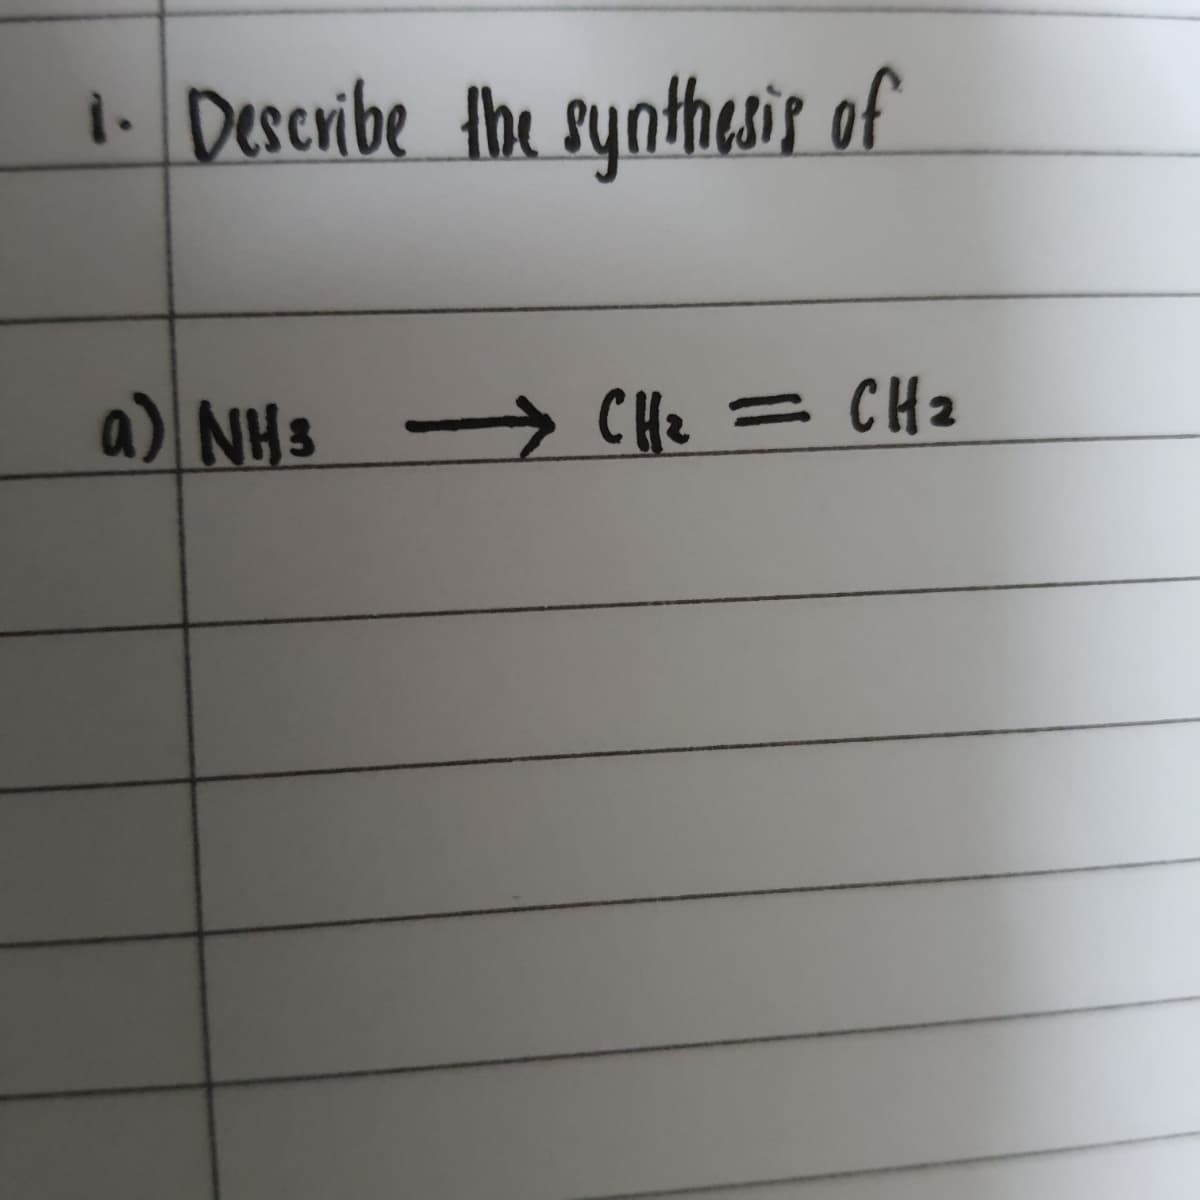 i Describe the synthesir of
a) NHs → CHz = CH2
